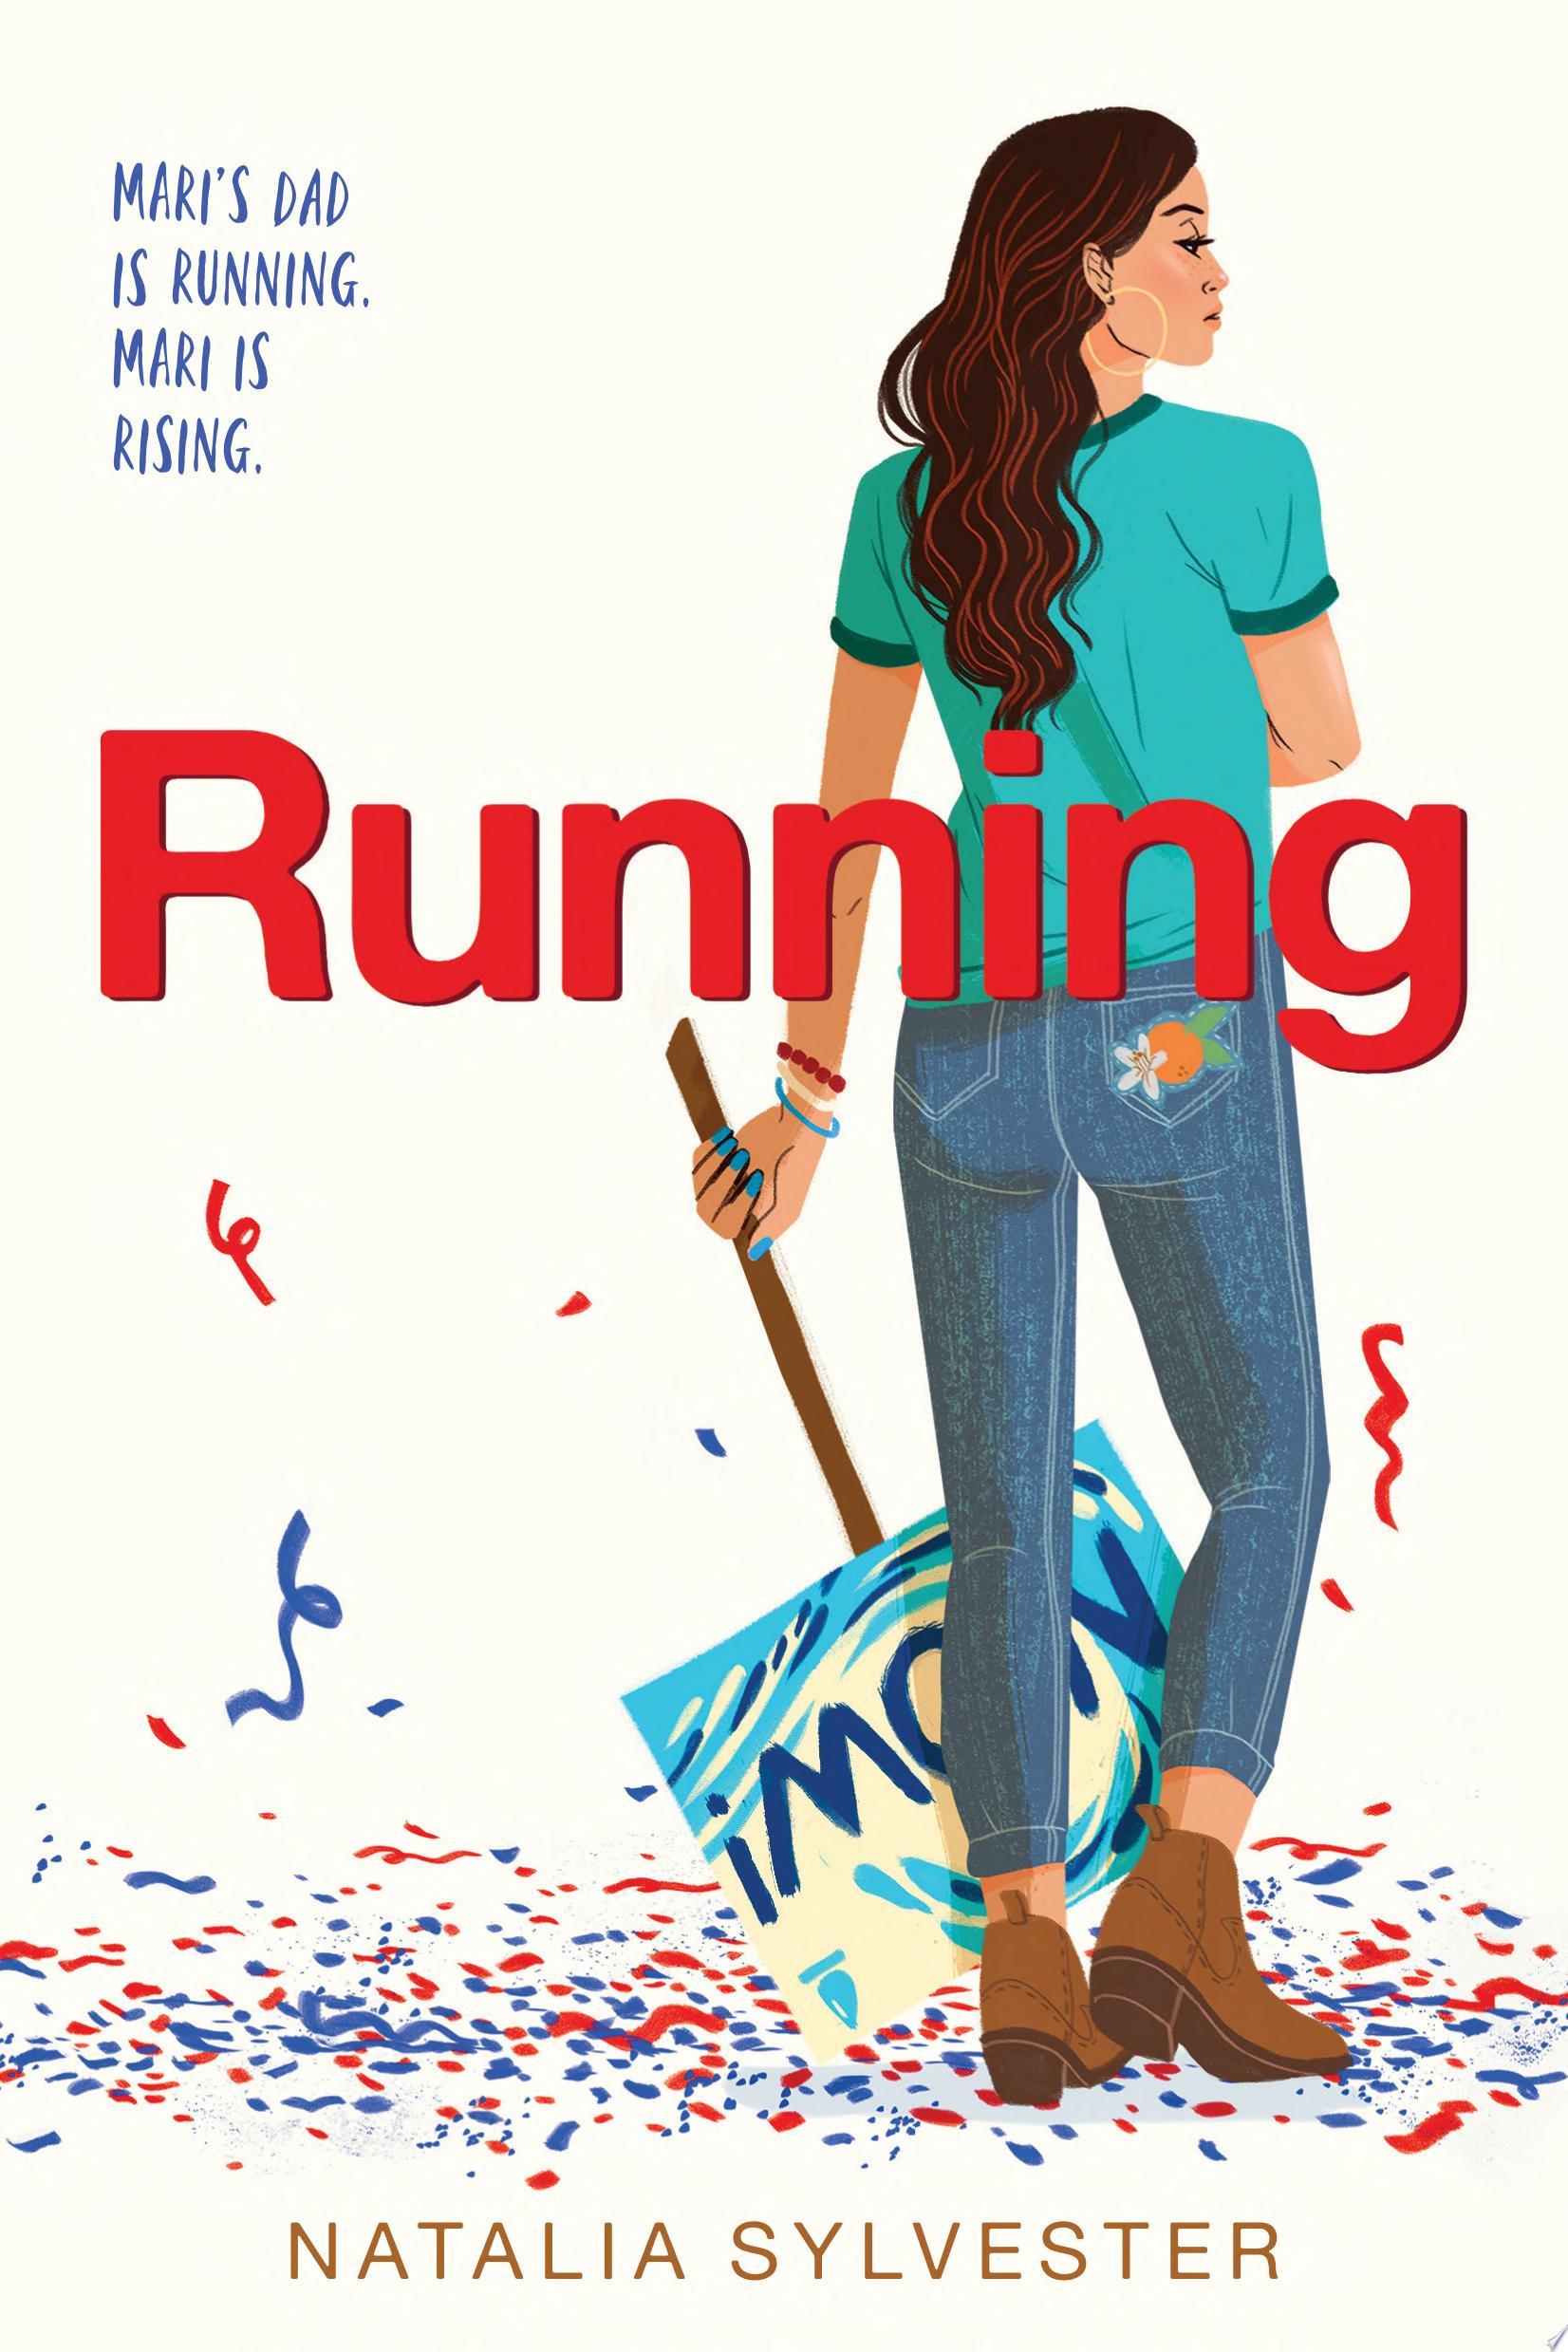 Image for "Running"